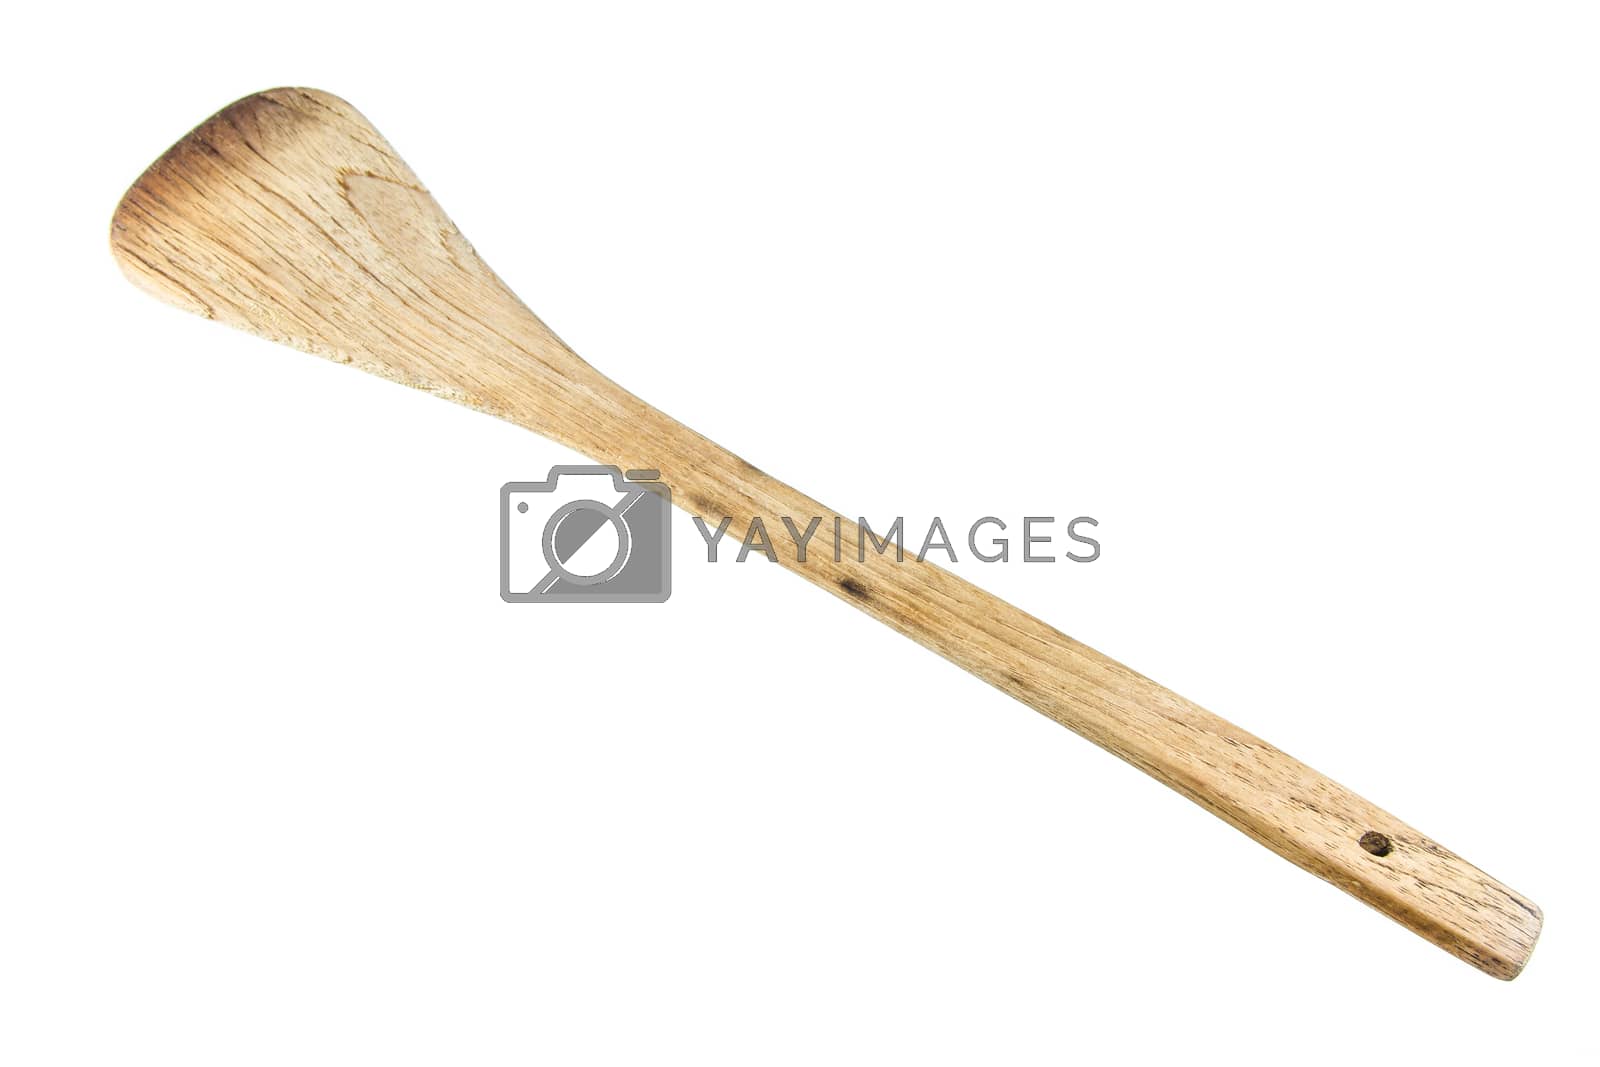 Royalty free image of wooden spade of frying pan by kasinv